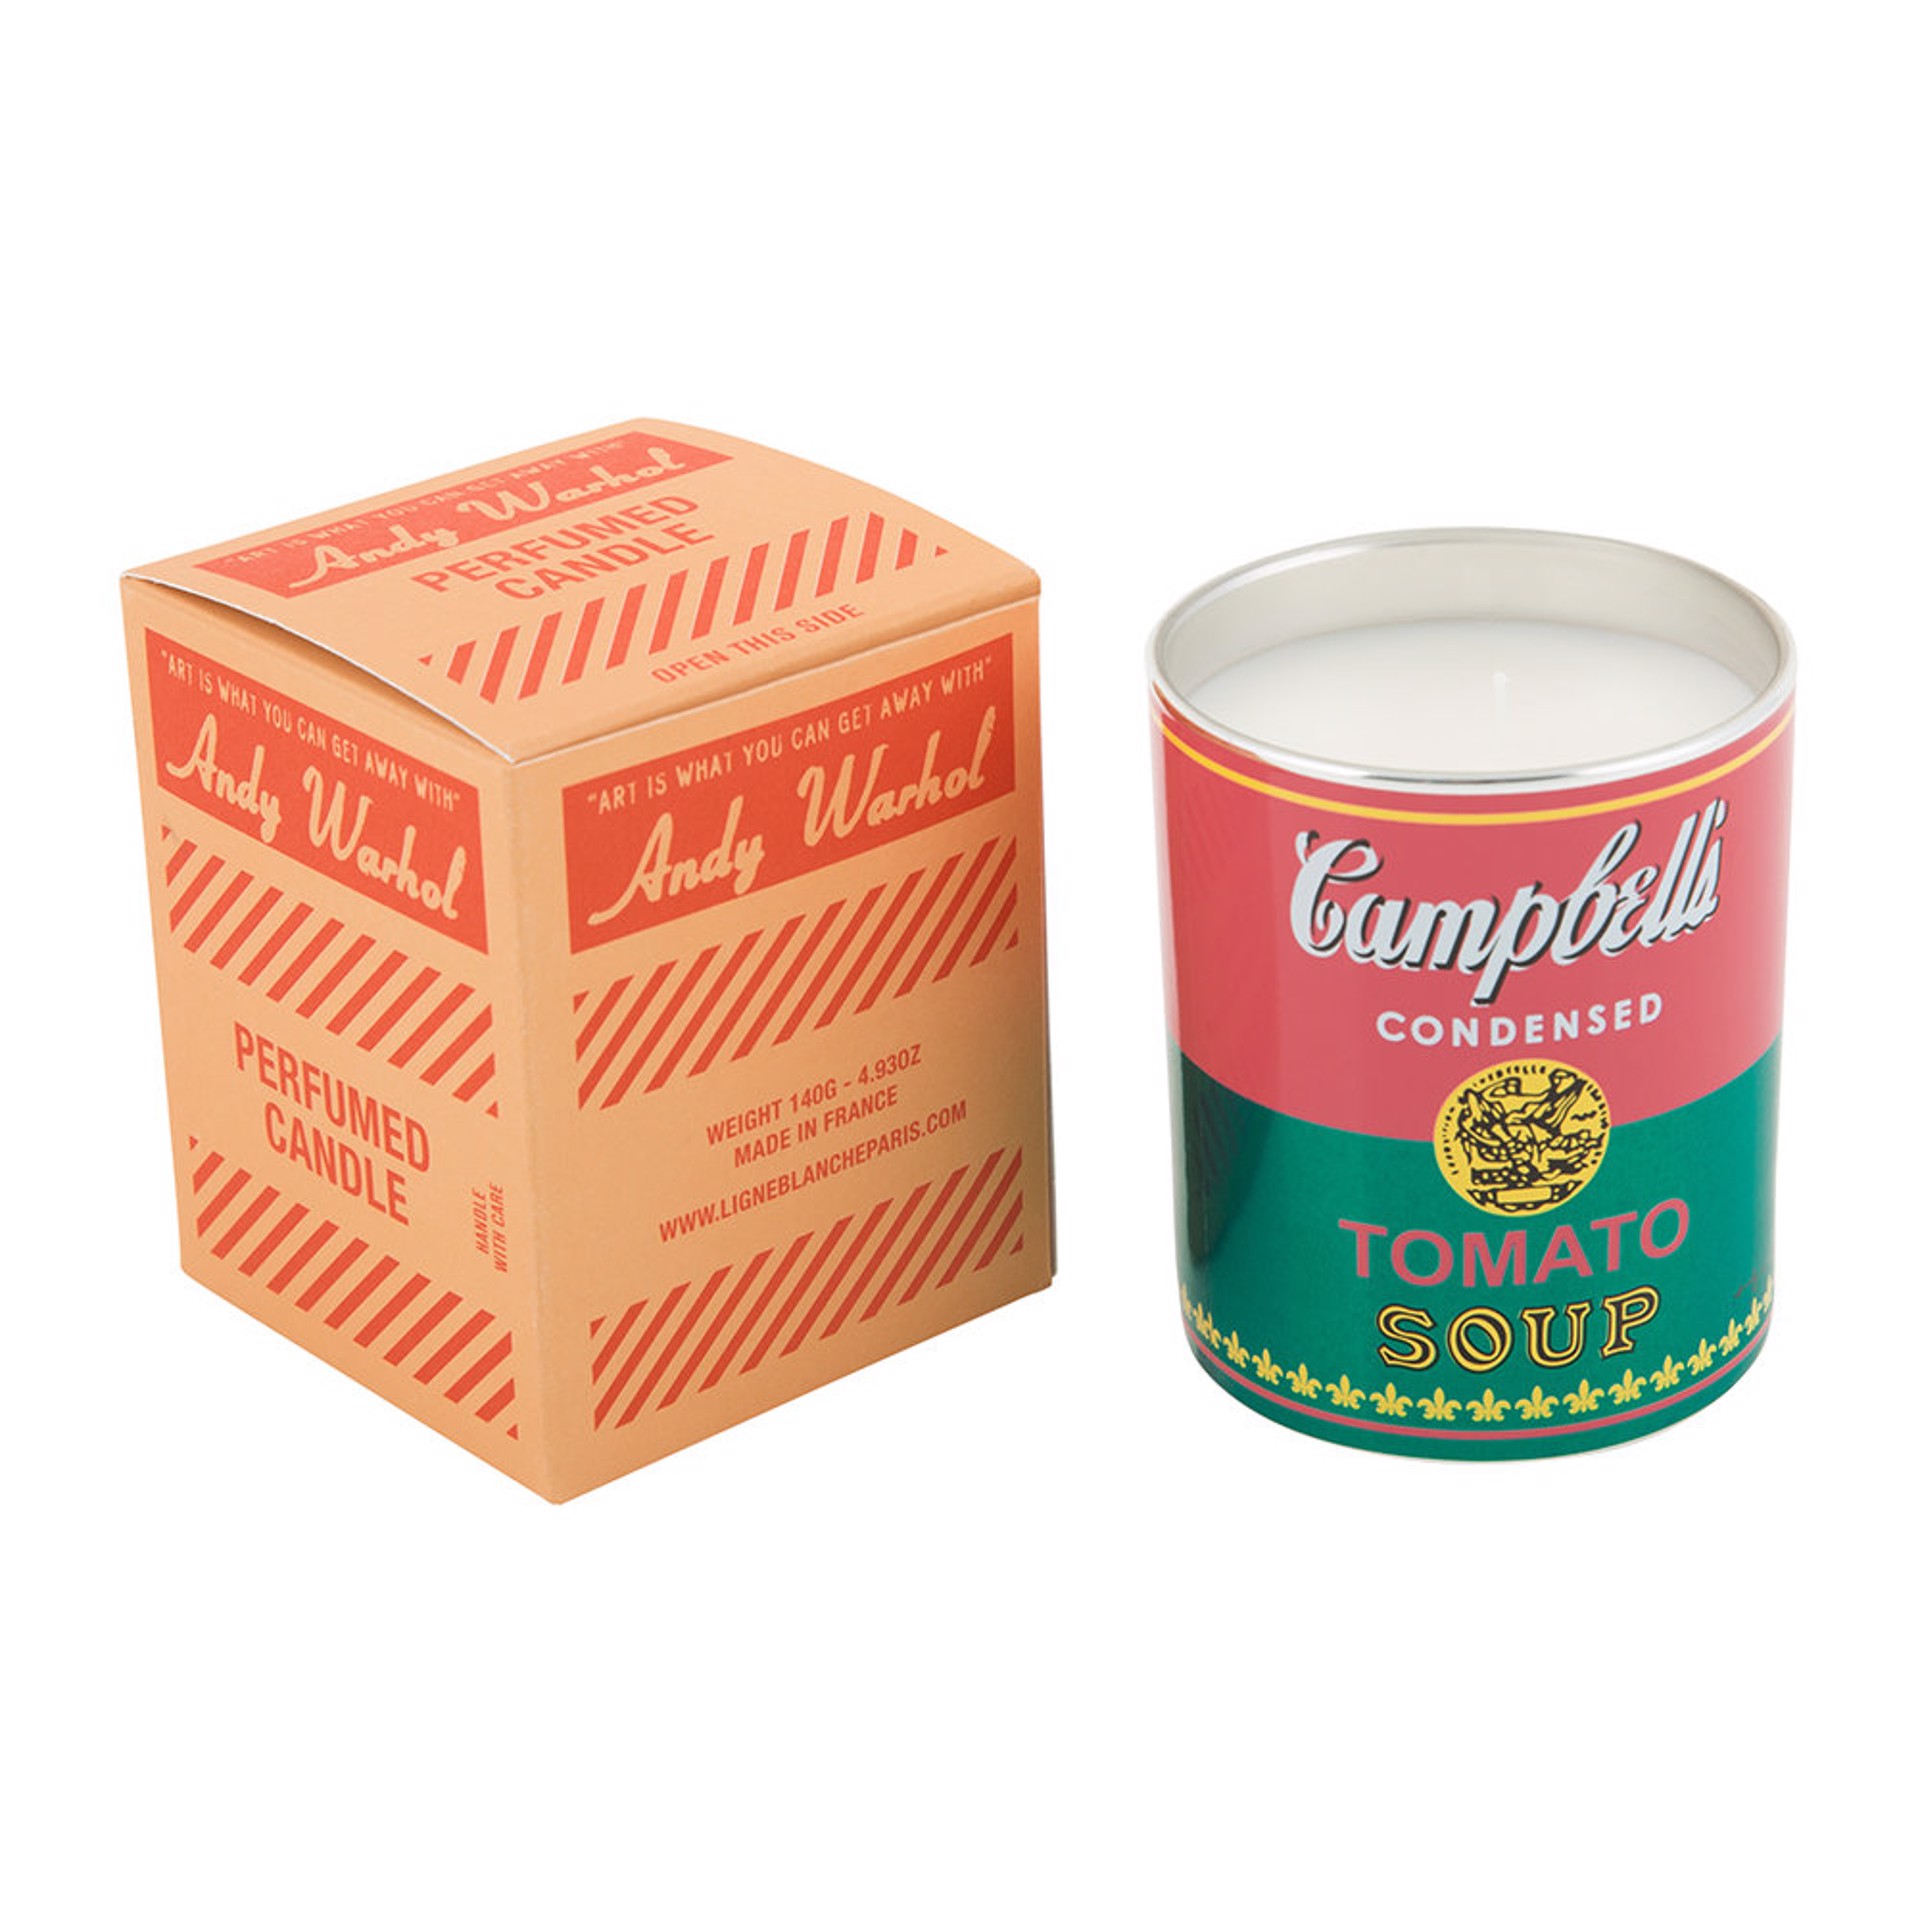 Campbell Soup Scented Candle - Rose/Green by Andy Warhol